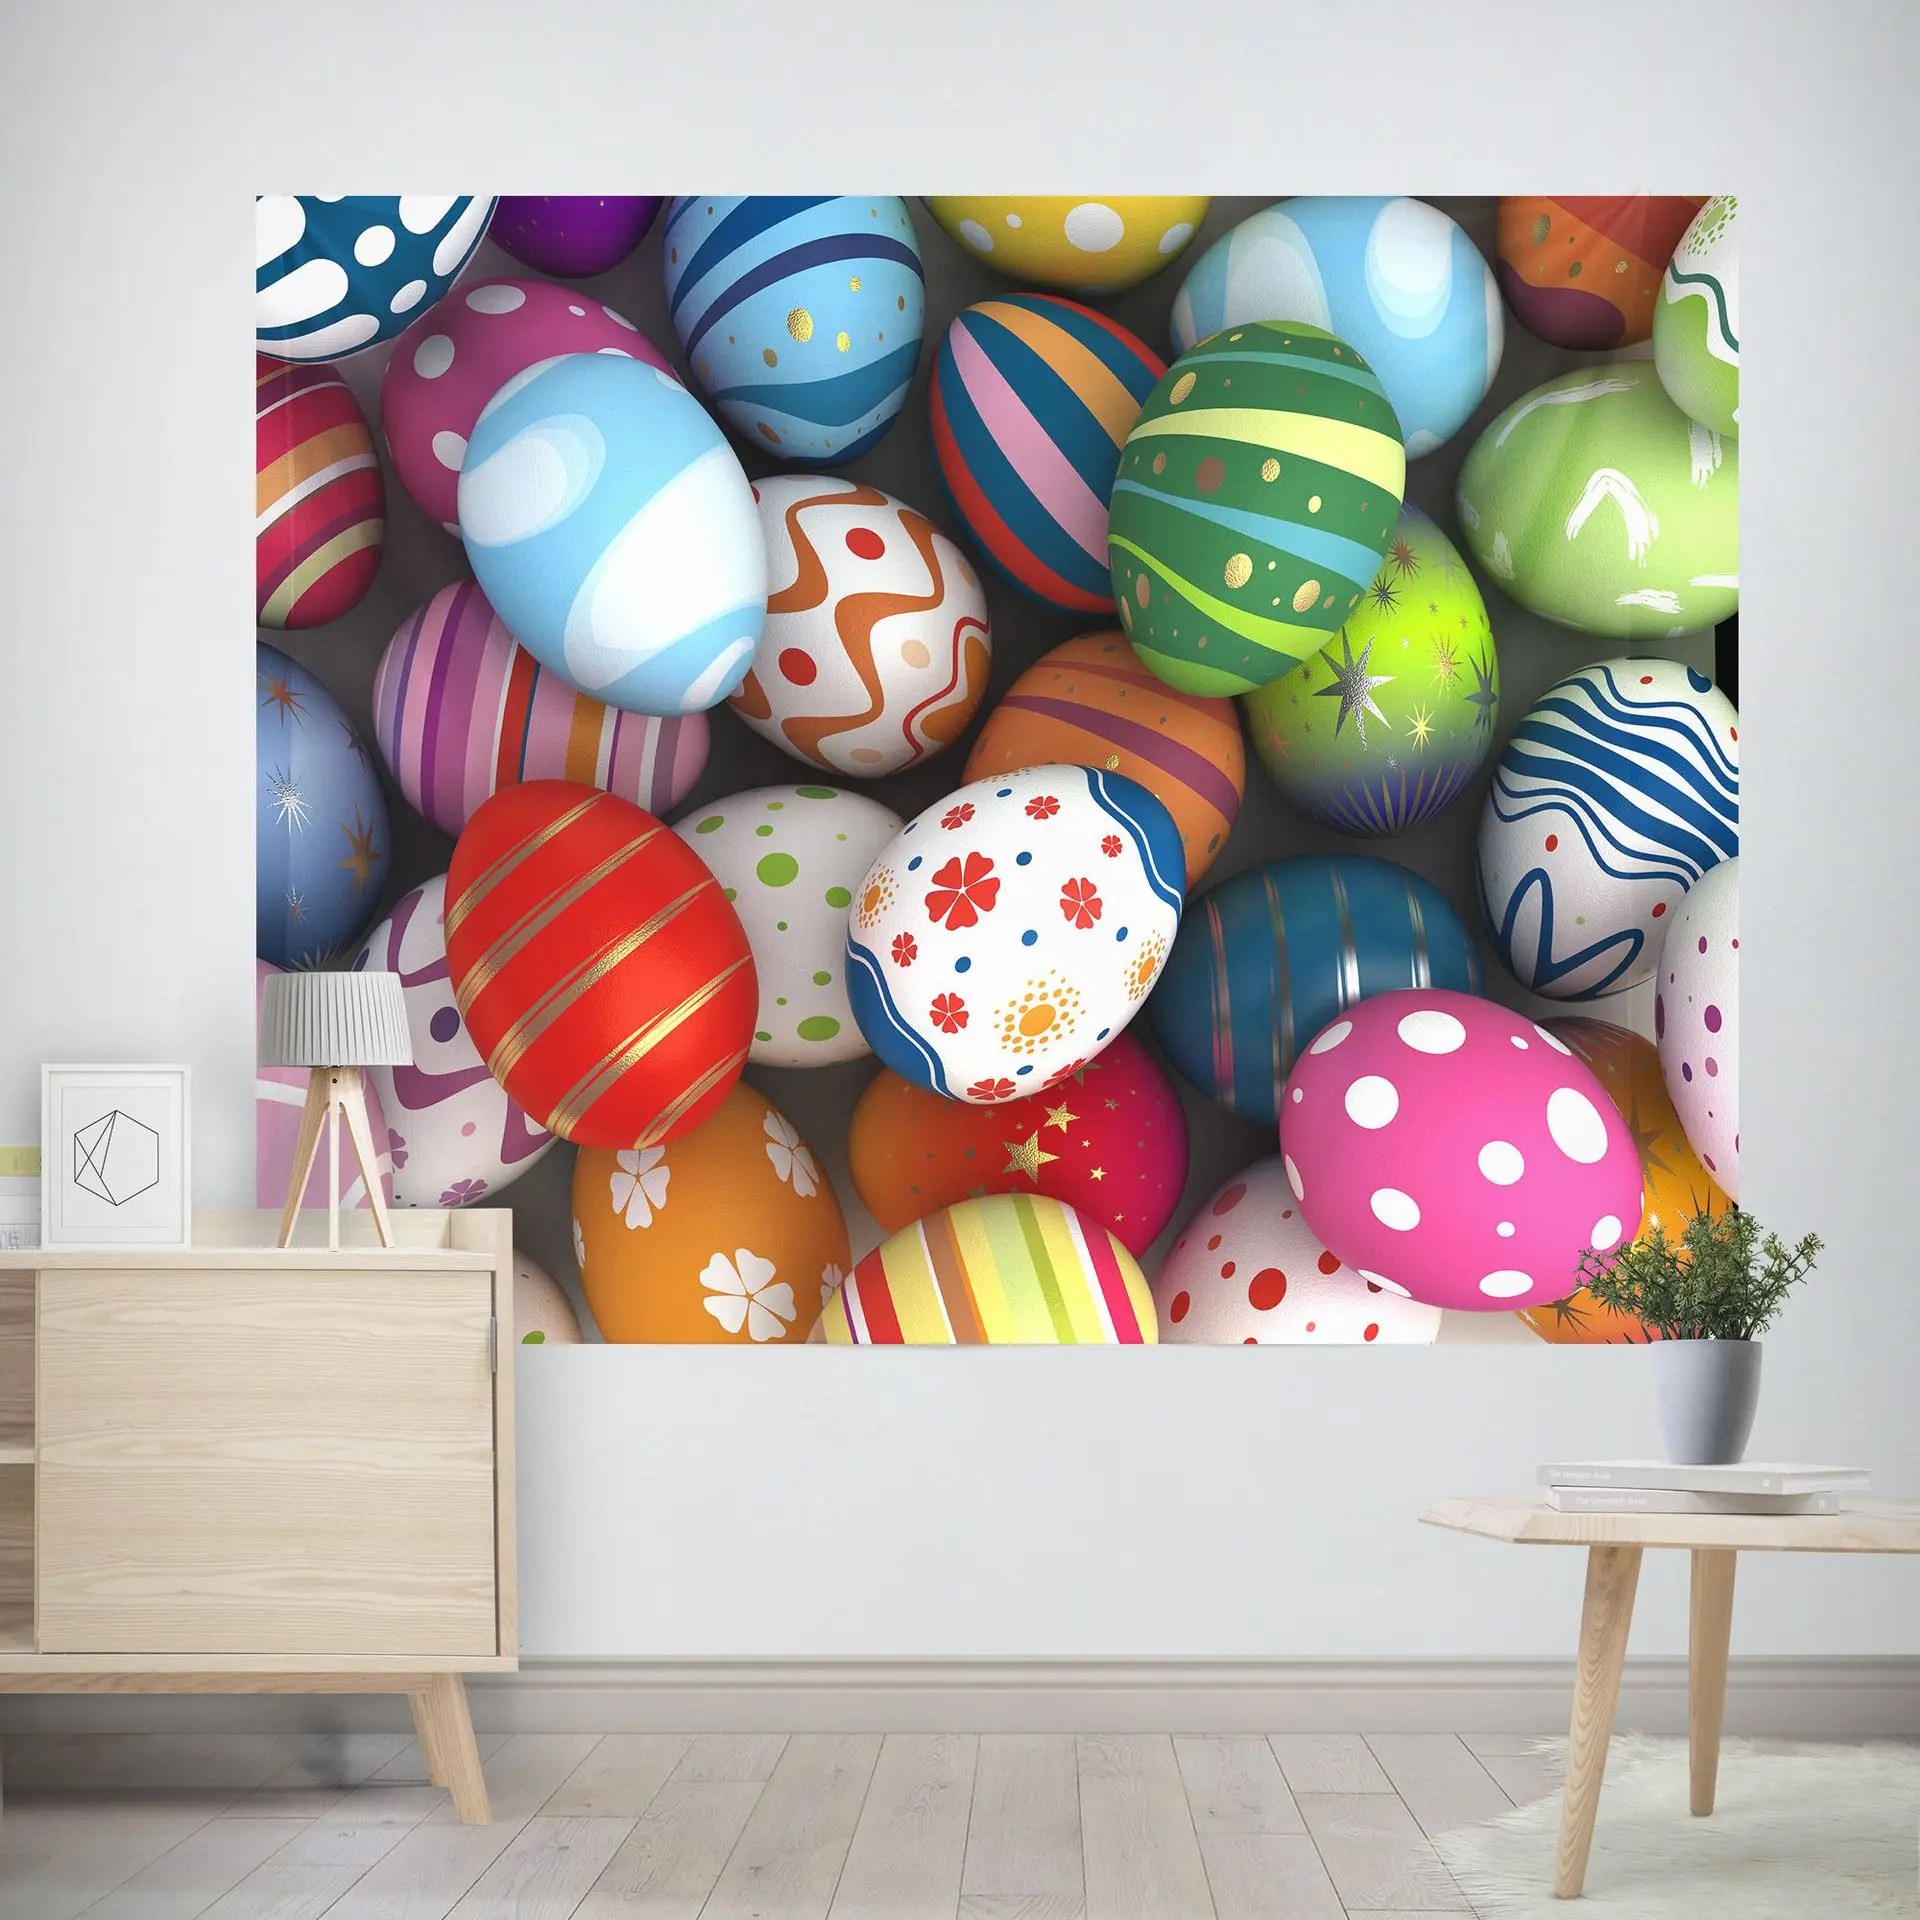 

Easter Eggs Wall Hanging Tapestry Bedroom Wall Blanket Decor Colorful Cartoon Rabbit Ears Wall Fabric Carpet Cloth Tapestries